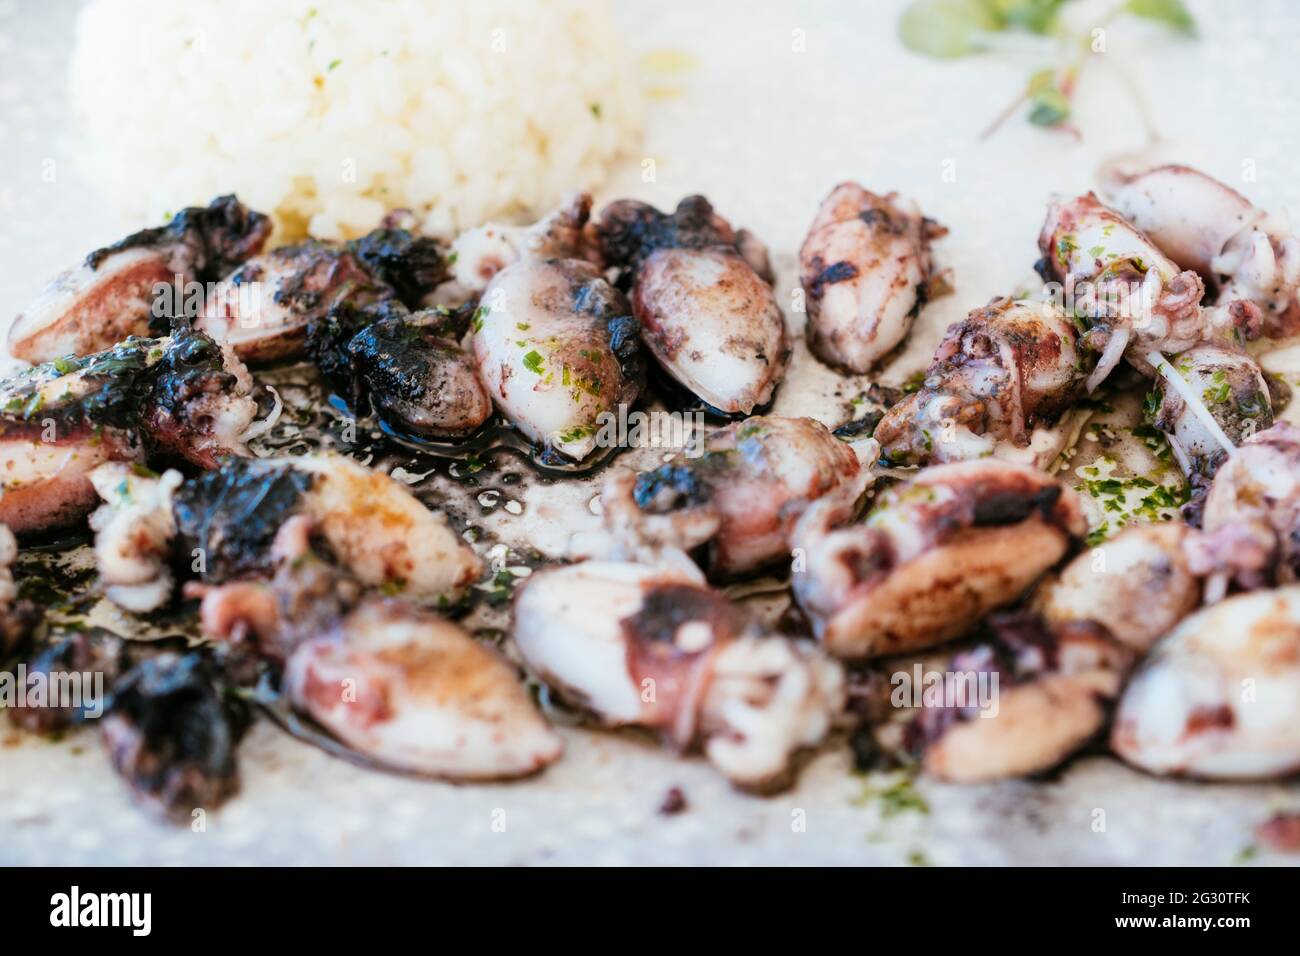 Typical Andalusian food. Chopitos grilled. Choquitos - Chopitos, members of the species Sepia elegans and Sepia orbignyana, are usually small in size. Stock Photo